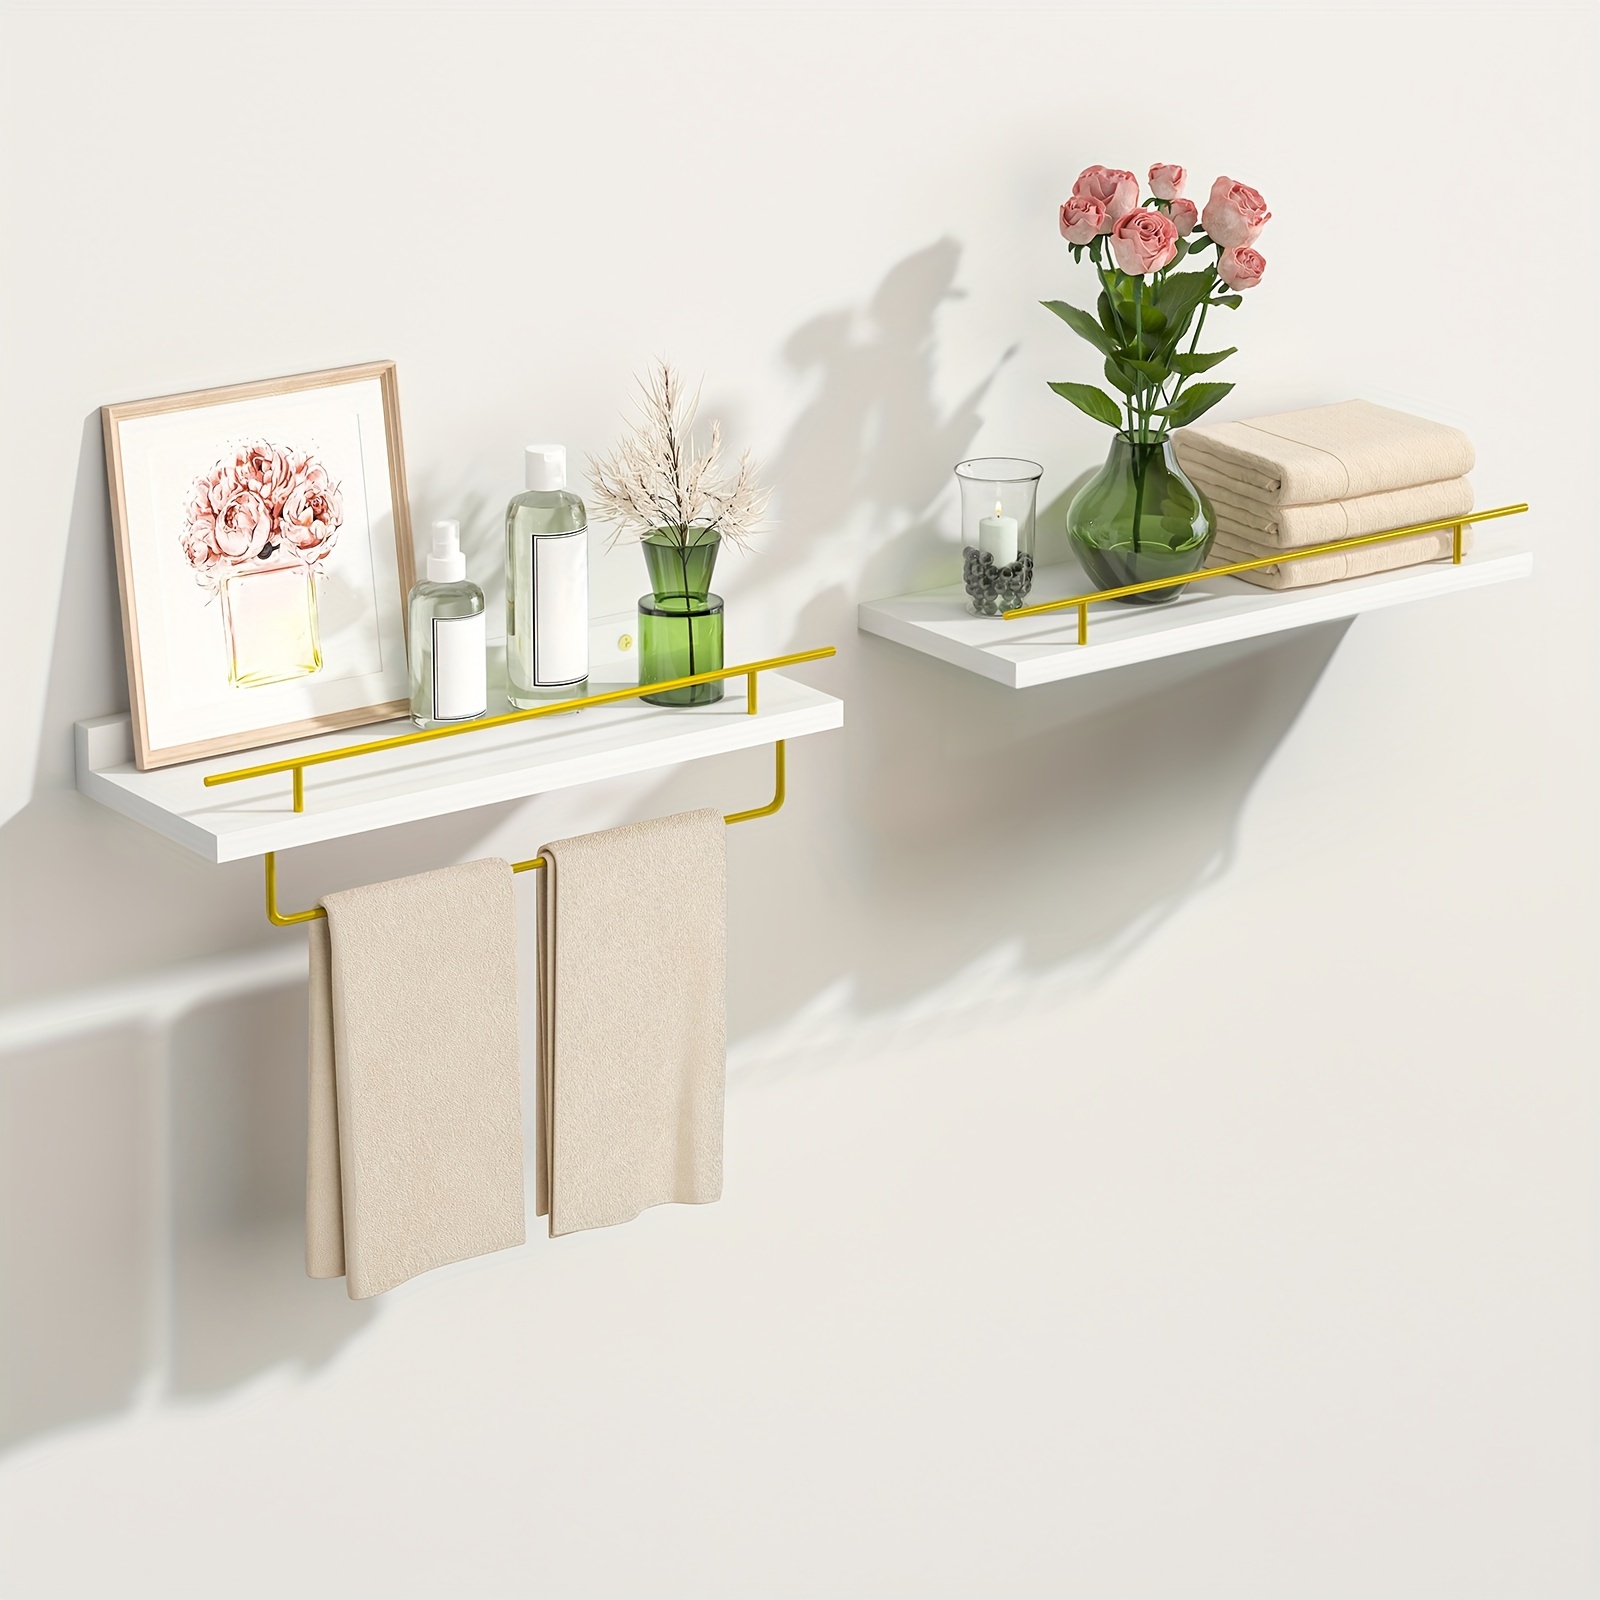 

3-shelves Floating Shelves, Bathroom Wall Decor With Storage Basket, Offer A Secure Storage Space For Bathroom Accessories, Shelves With Towel Rack For Bedroom (white & Gold)